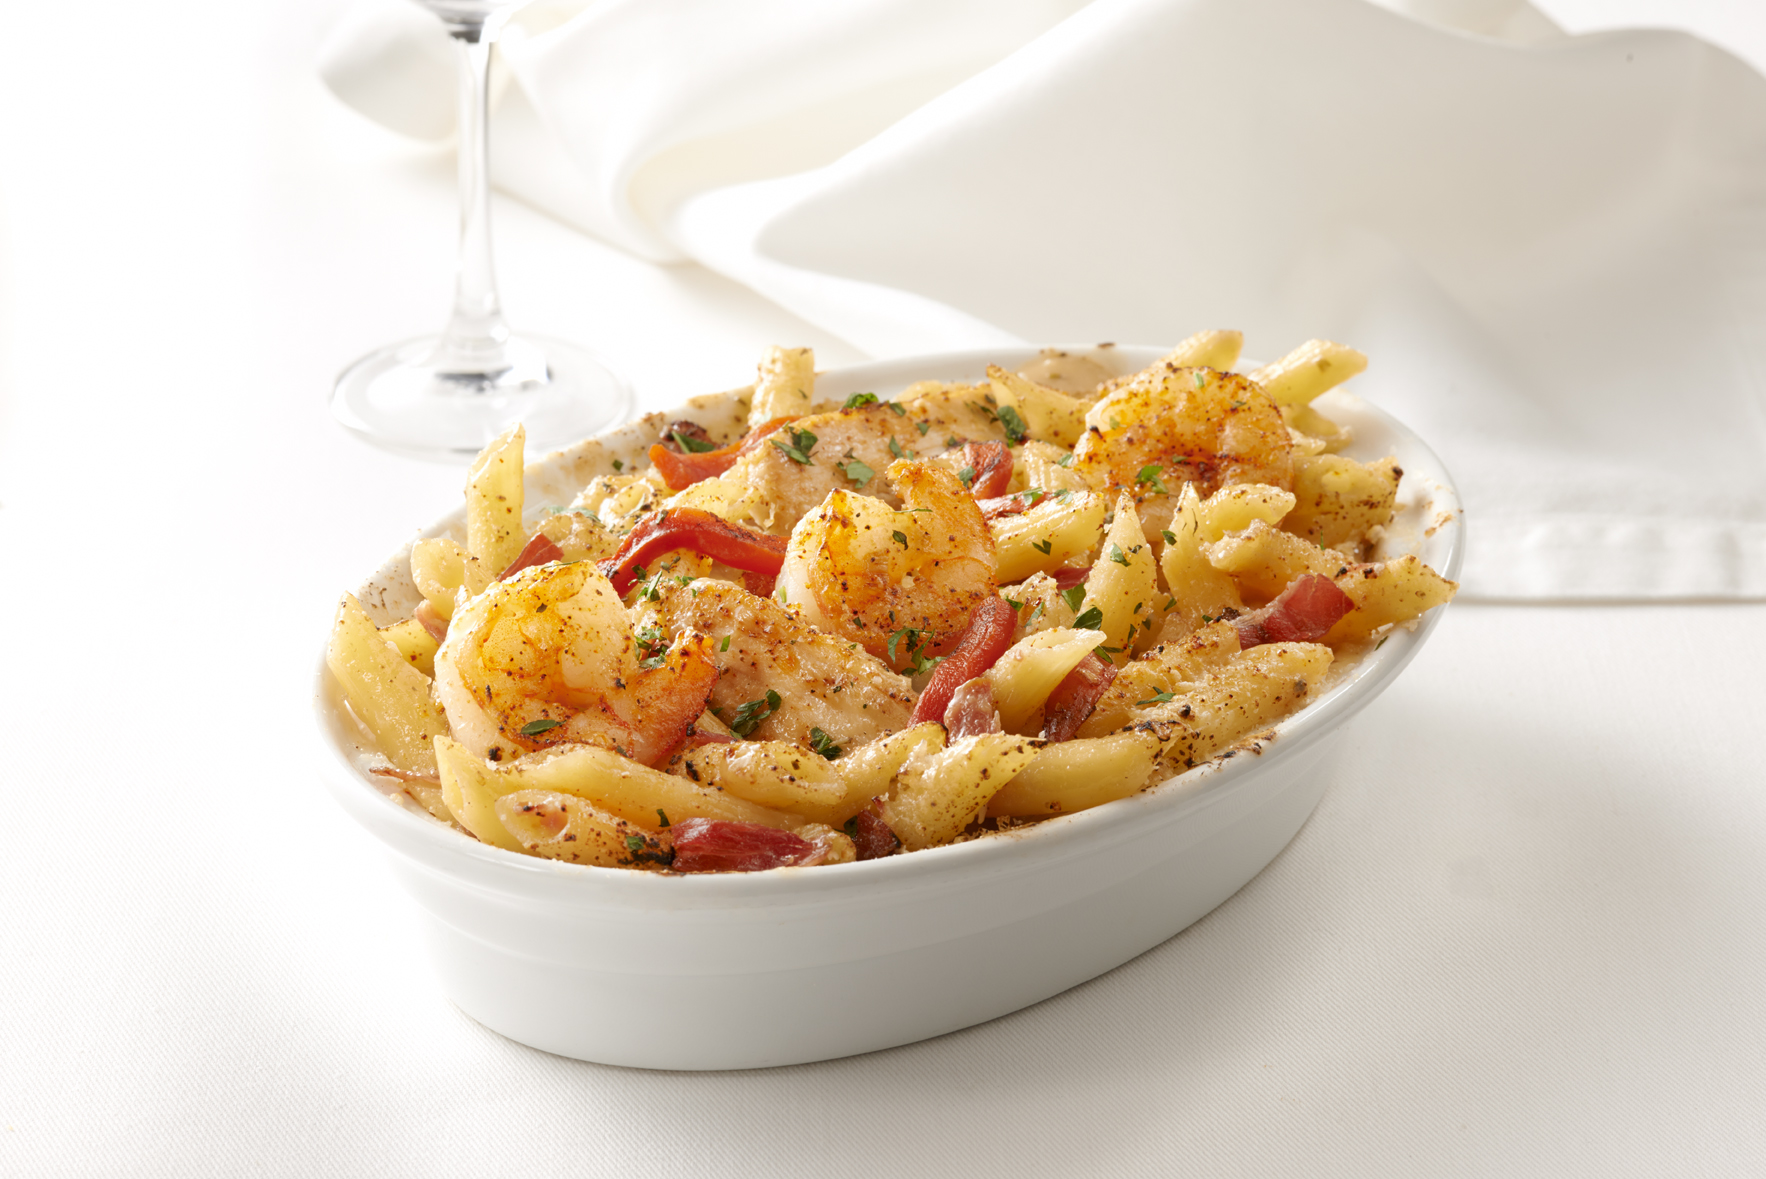 Uivatel Macaroni Grill na Twitteru: Today only, buy one Penne Rustica, get one free. Available for dine-in or online orders. Use code 